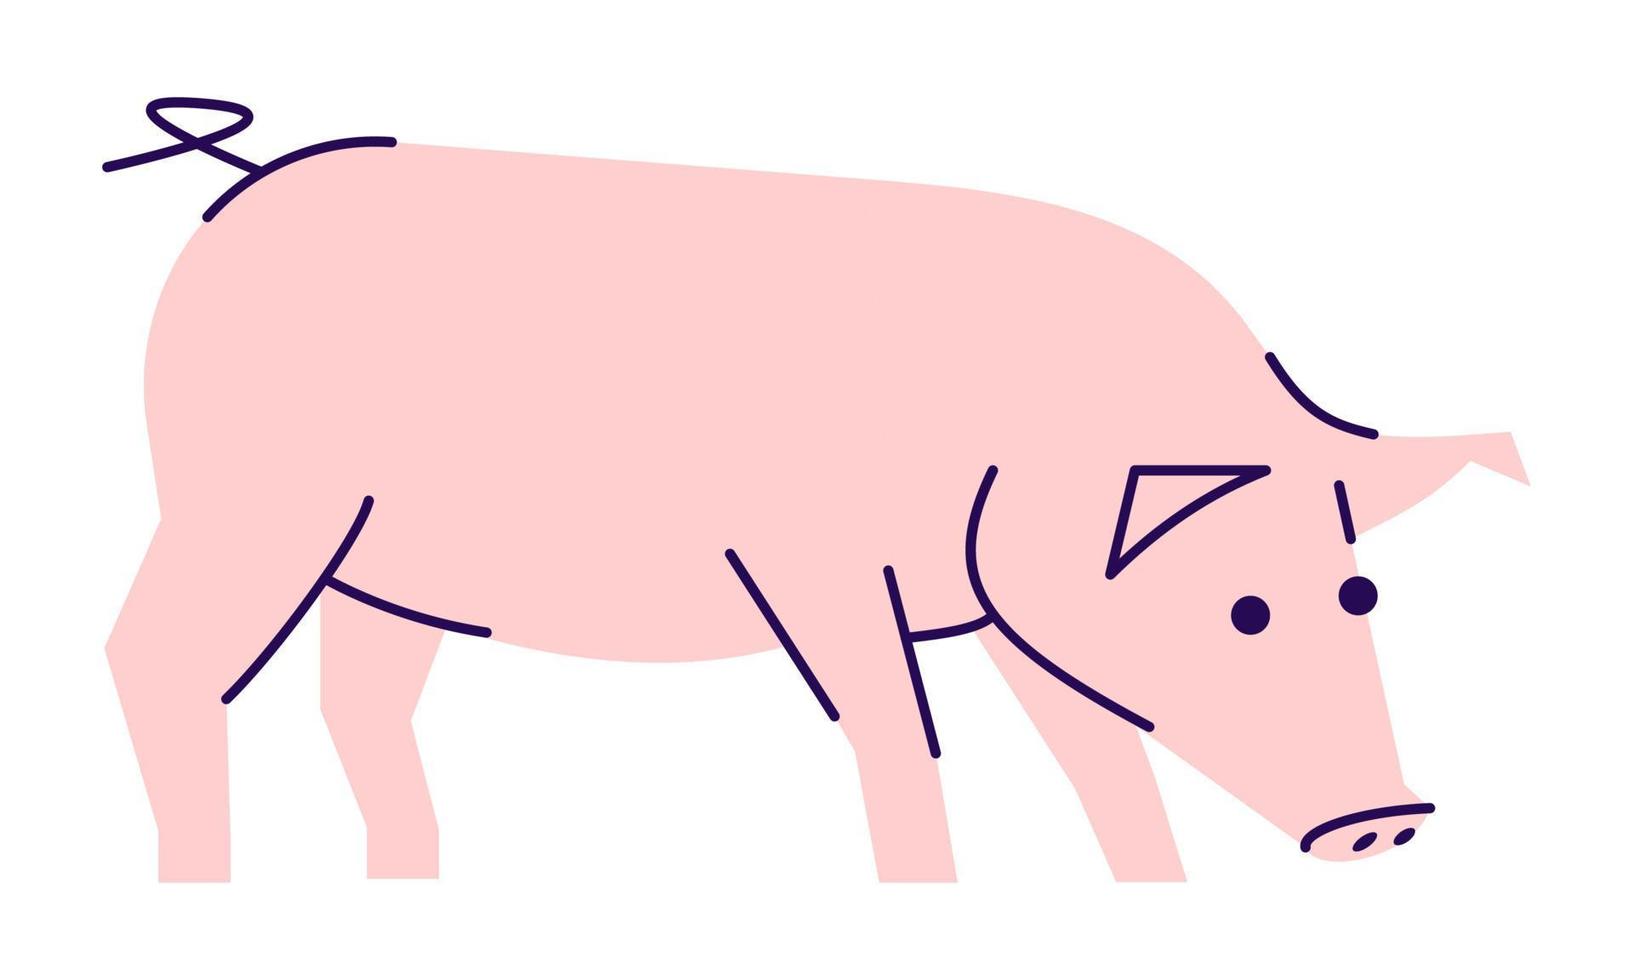 Pig side view flat vector illustration. Livestock farming, domestic animal husbandry design element with outline. Pork meat production logo. Cartoon piglet isolated on white background